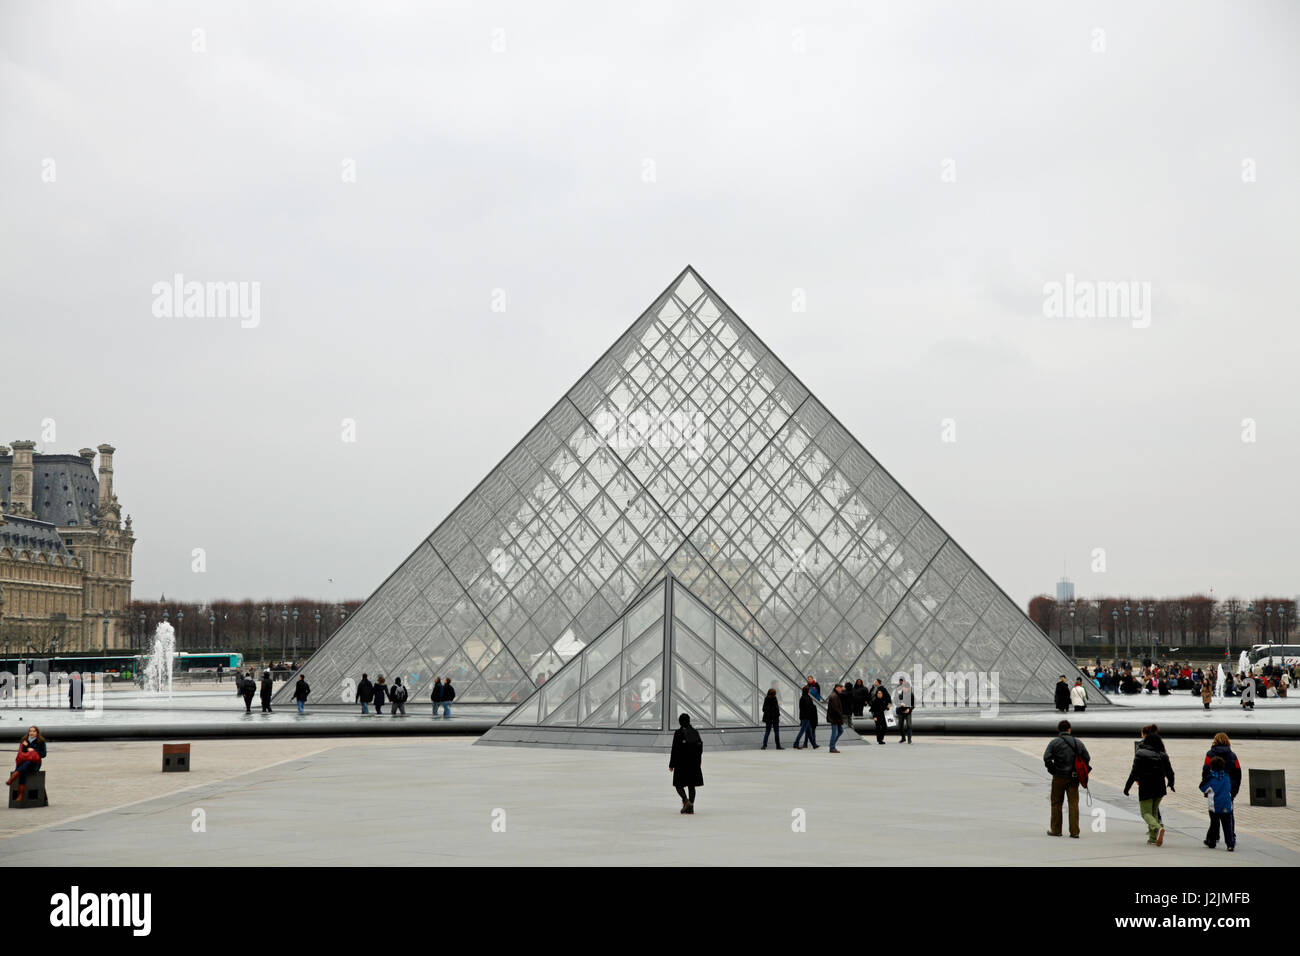 The Louvre Pyramid (Pyramide du Louvre) is a large glass and metal pyramid, designed by I. M. Pei, in the main courtyard of the Louvre Museum, Paris Stock Photo